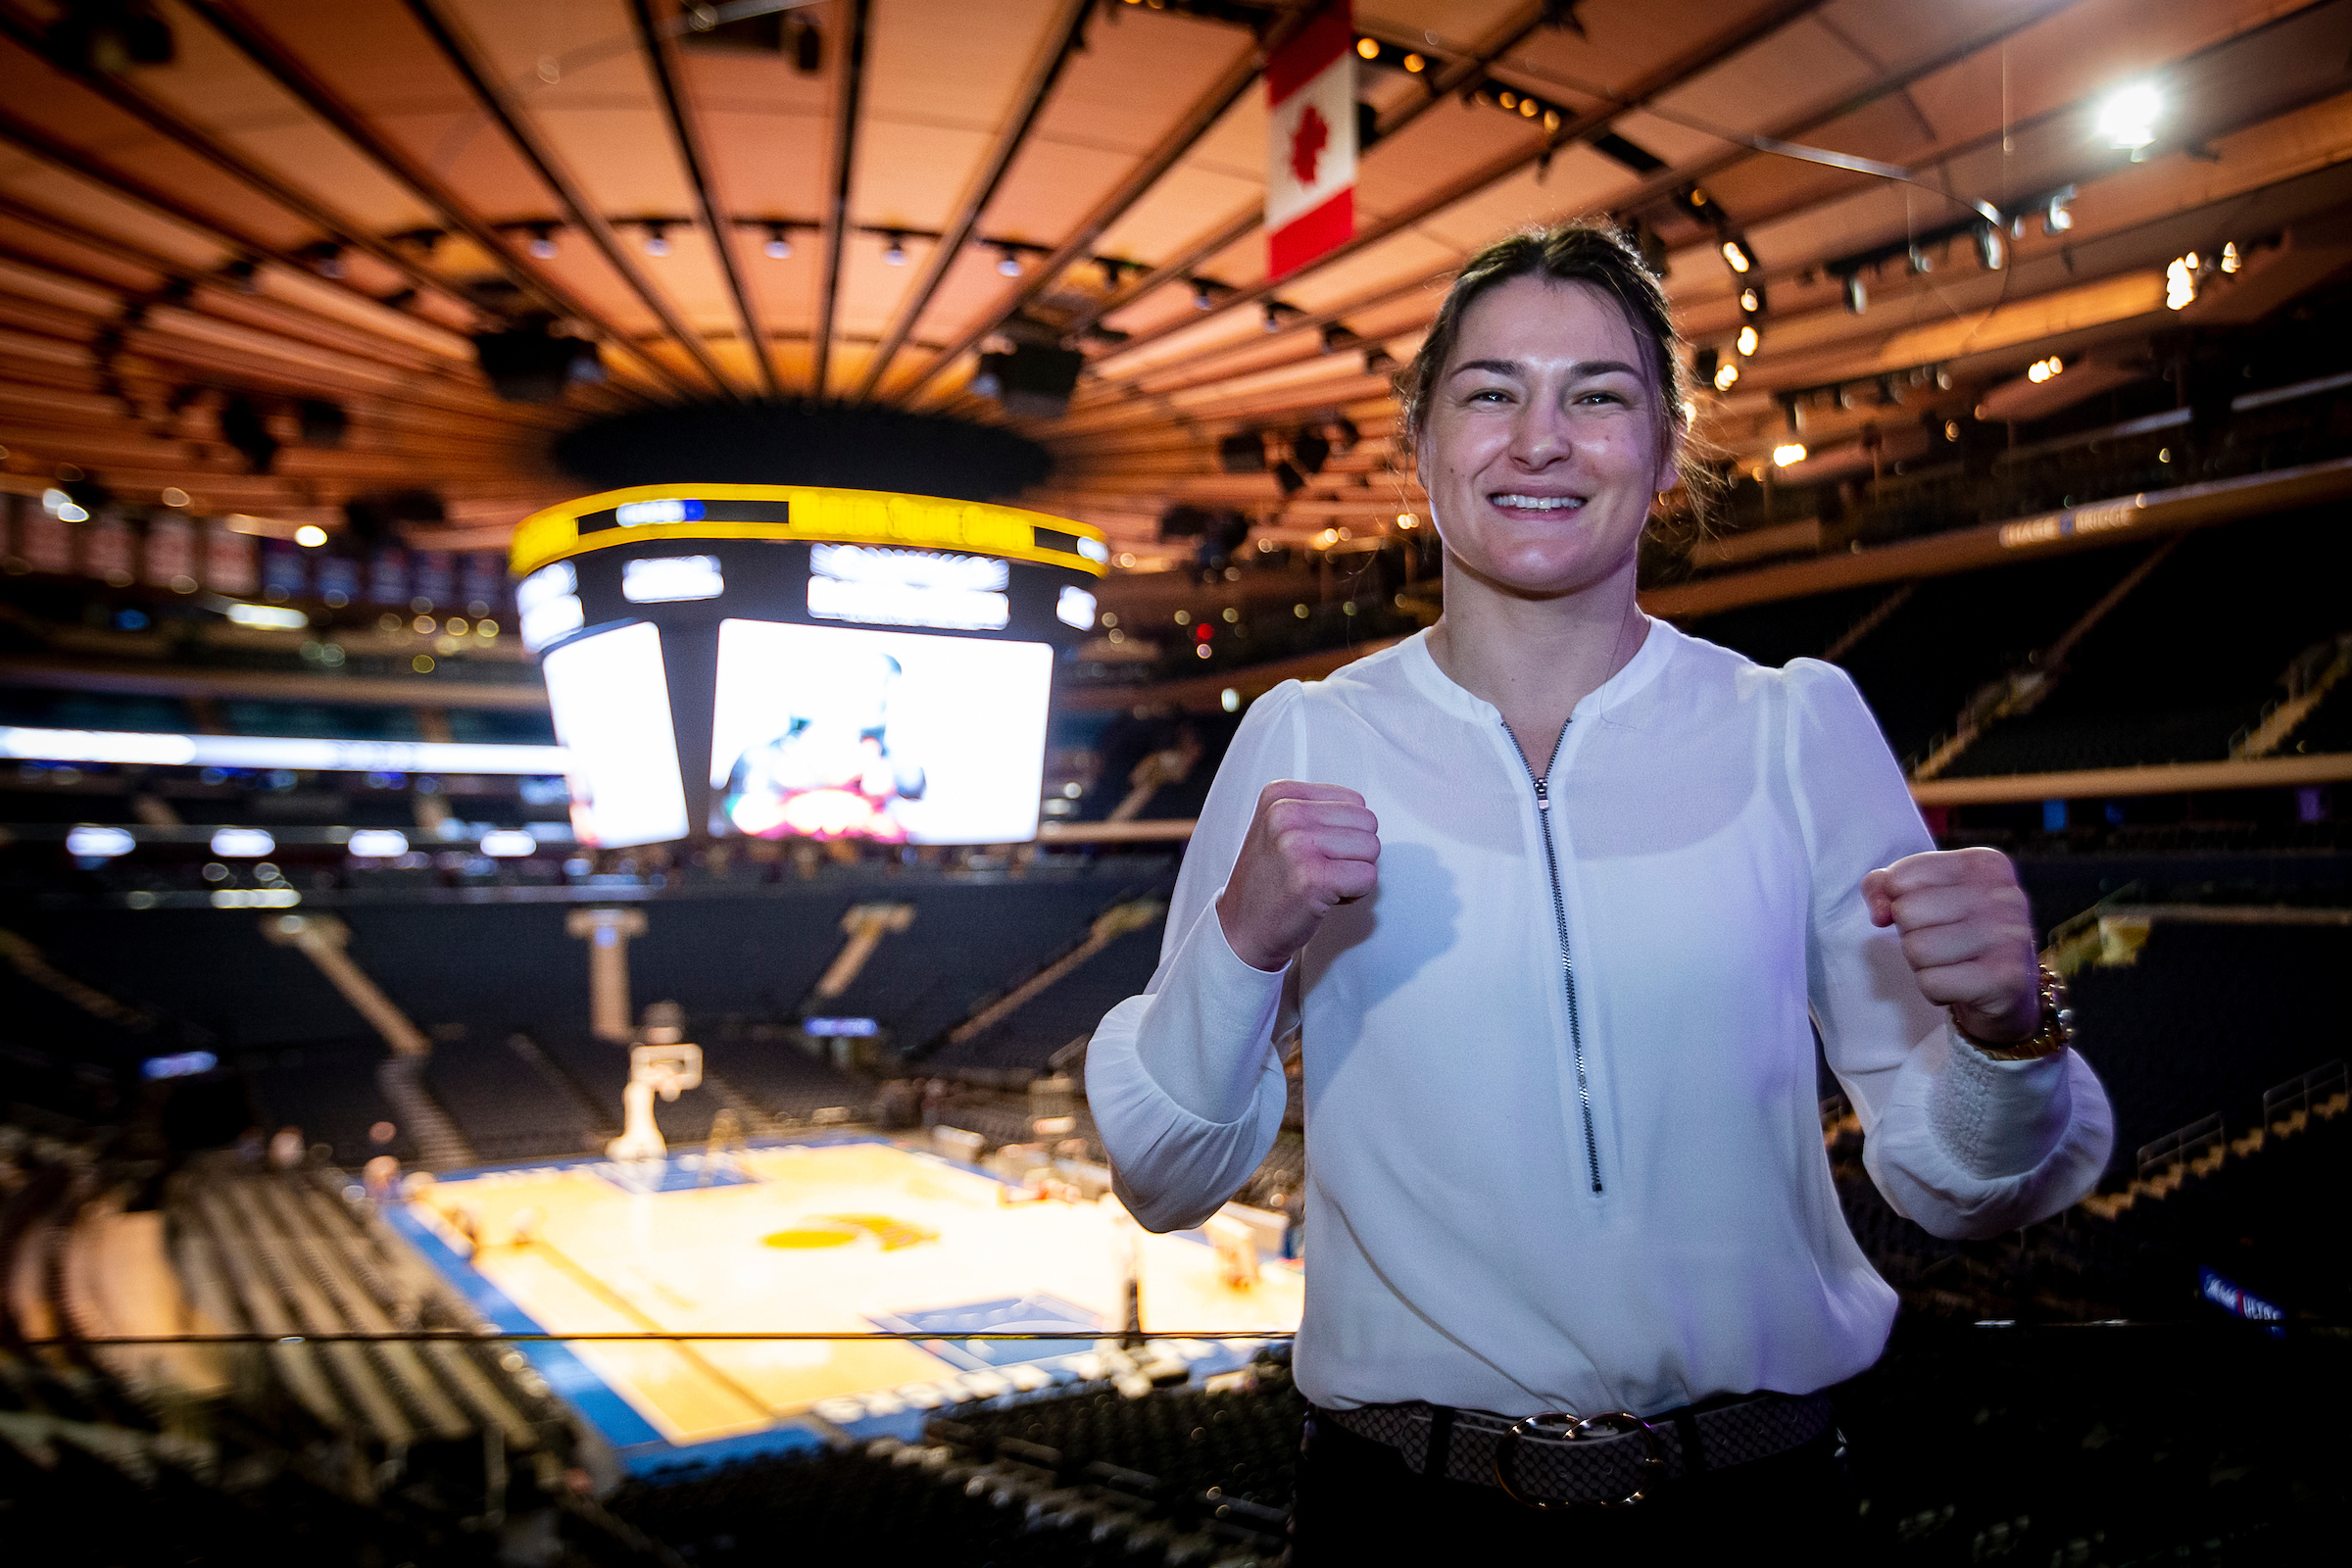 February 2, 2022; New York, NY; Behind the scenes of Eddie Hearn of Matchroom, Undisputed World Lightweight champion Katie Taylor during Good Day New York Sports Extra with Tina Cervasio announcing their fight April 30, 2022 at Madison Square Garden in New York City. Mandatory Credit: Michelle Farsi for Matchroom/MSG Photos